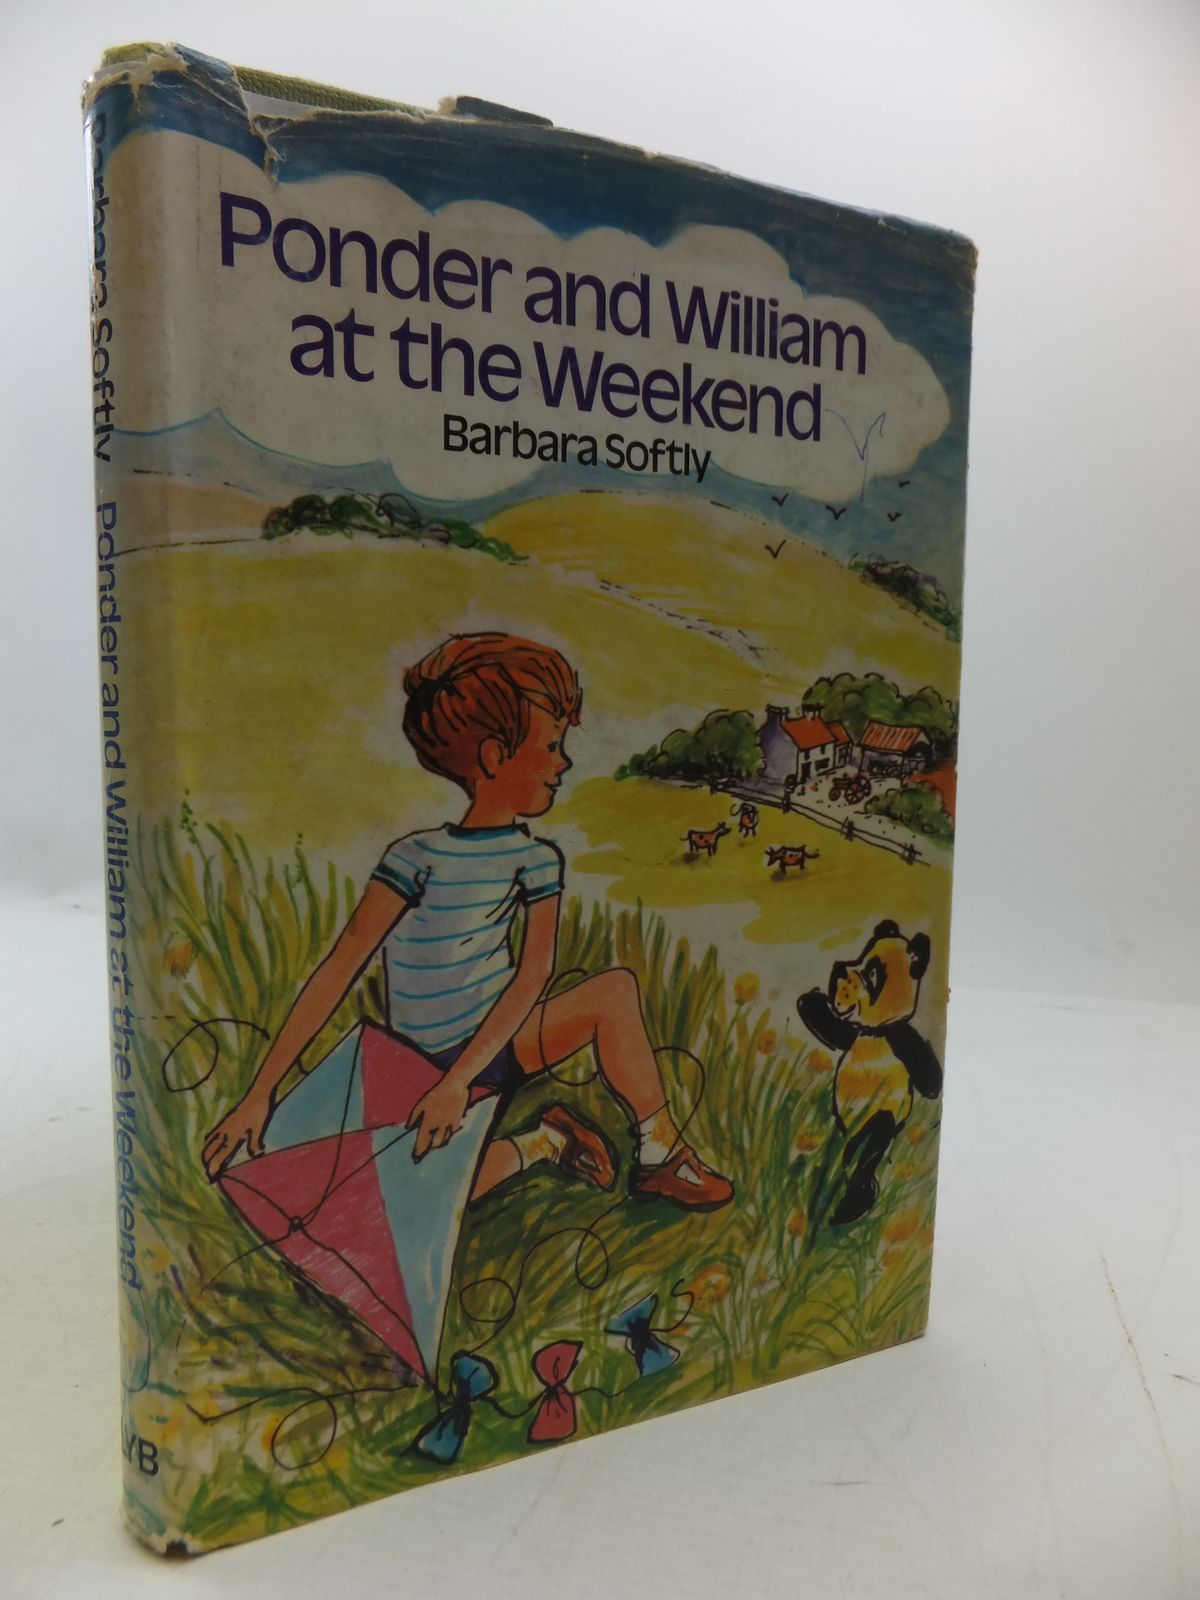 Cover of PONDER AND WILLIAM AT THE WEEKEND by Barbara Softly